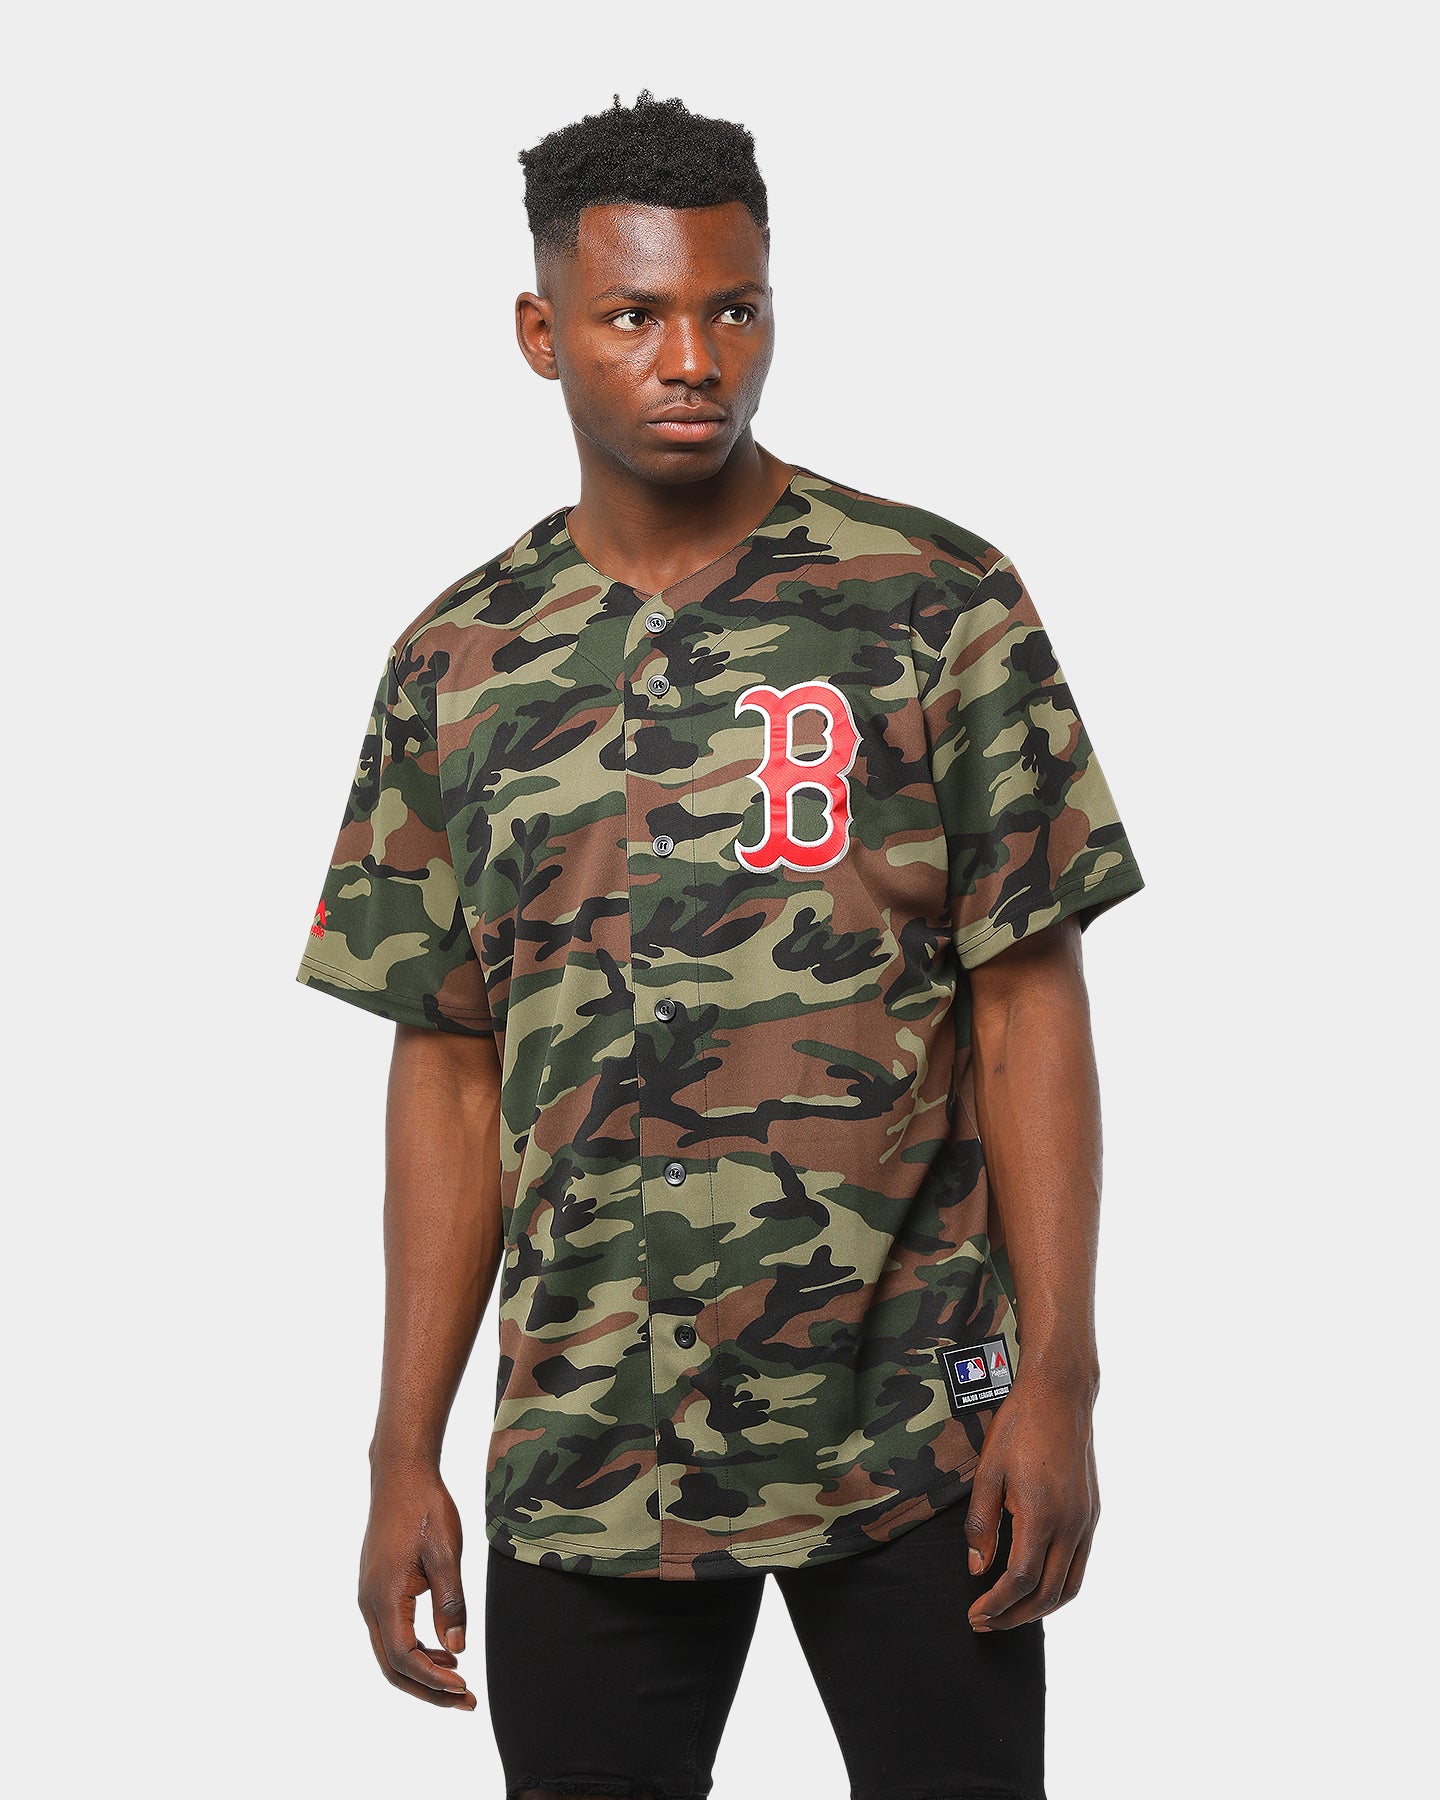 red sox camo jersey